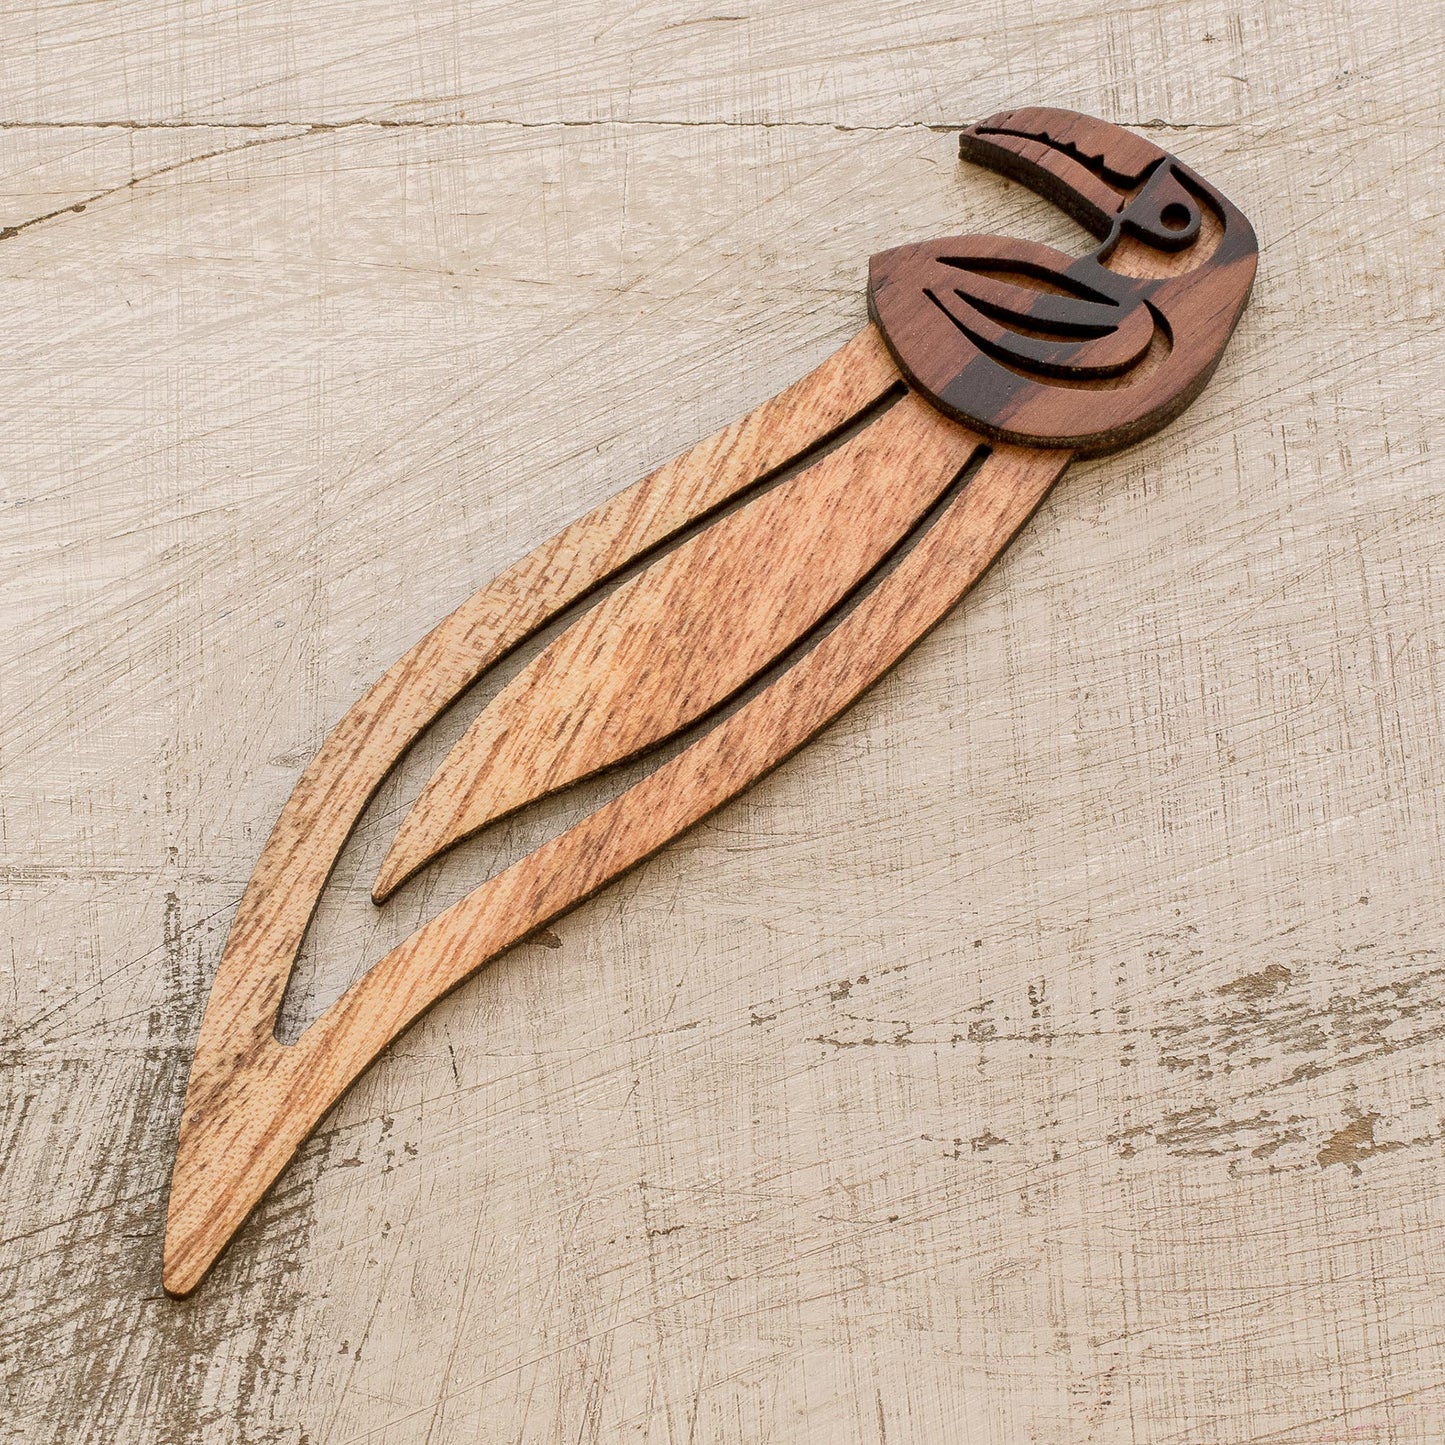 Toucan Reader Toucan-Themed Teak Wood Bookmark from Costa Rica